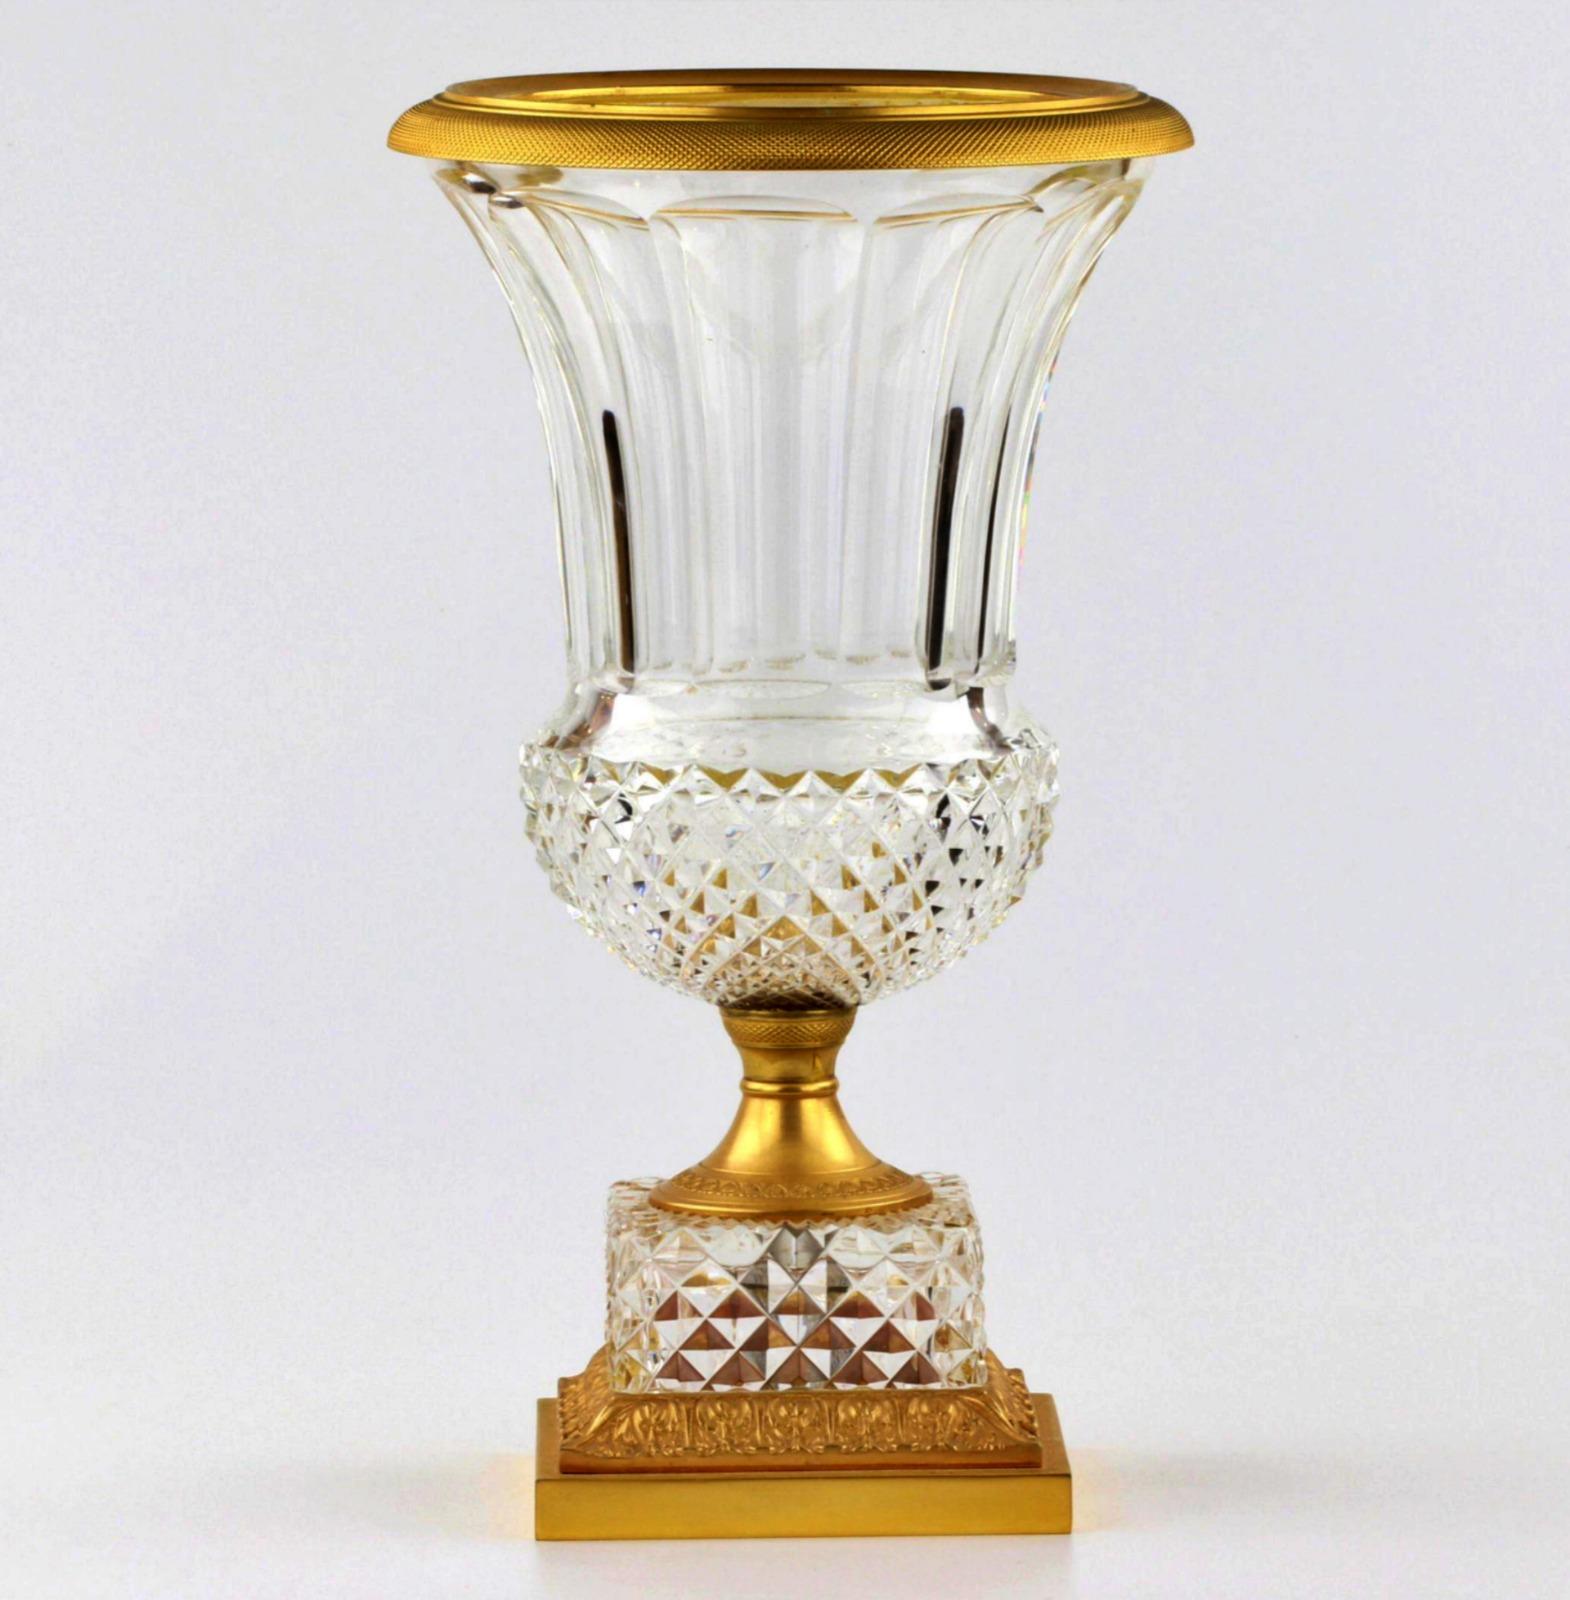 Napoleon III Crystal Vase - Empire - France 19th century
with gilt bronze and diamond padding on the bases.
Classic proportions and design.
H-35cm. Width: 20cm, Height: 35cm, Depth: 20cm, Weight: 3kg, Condition: Good, Material: Glass, gilded